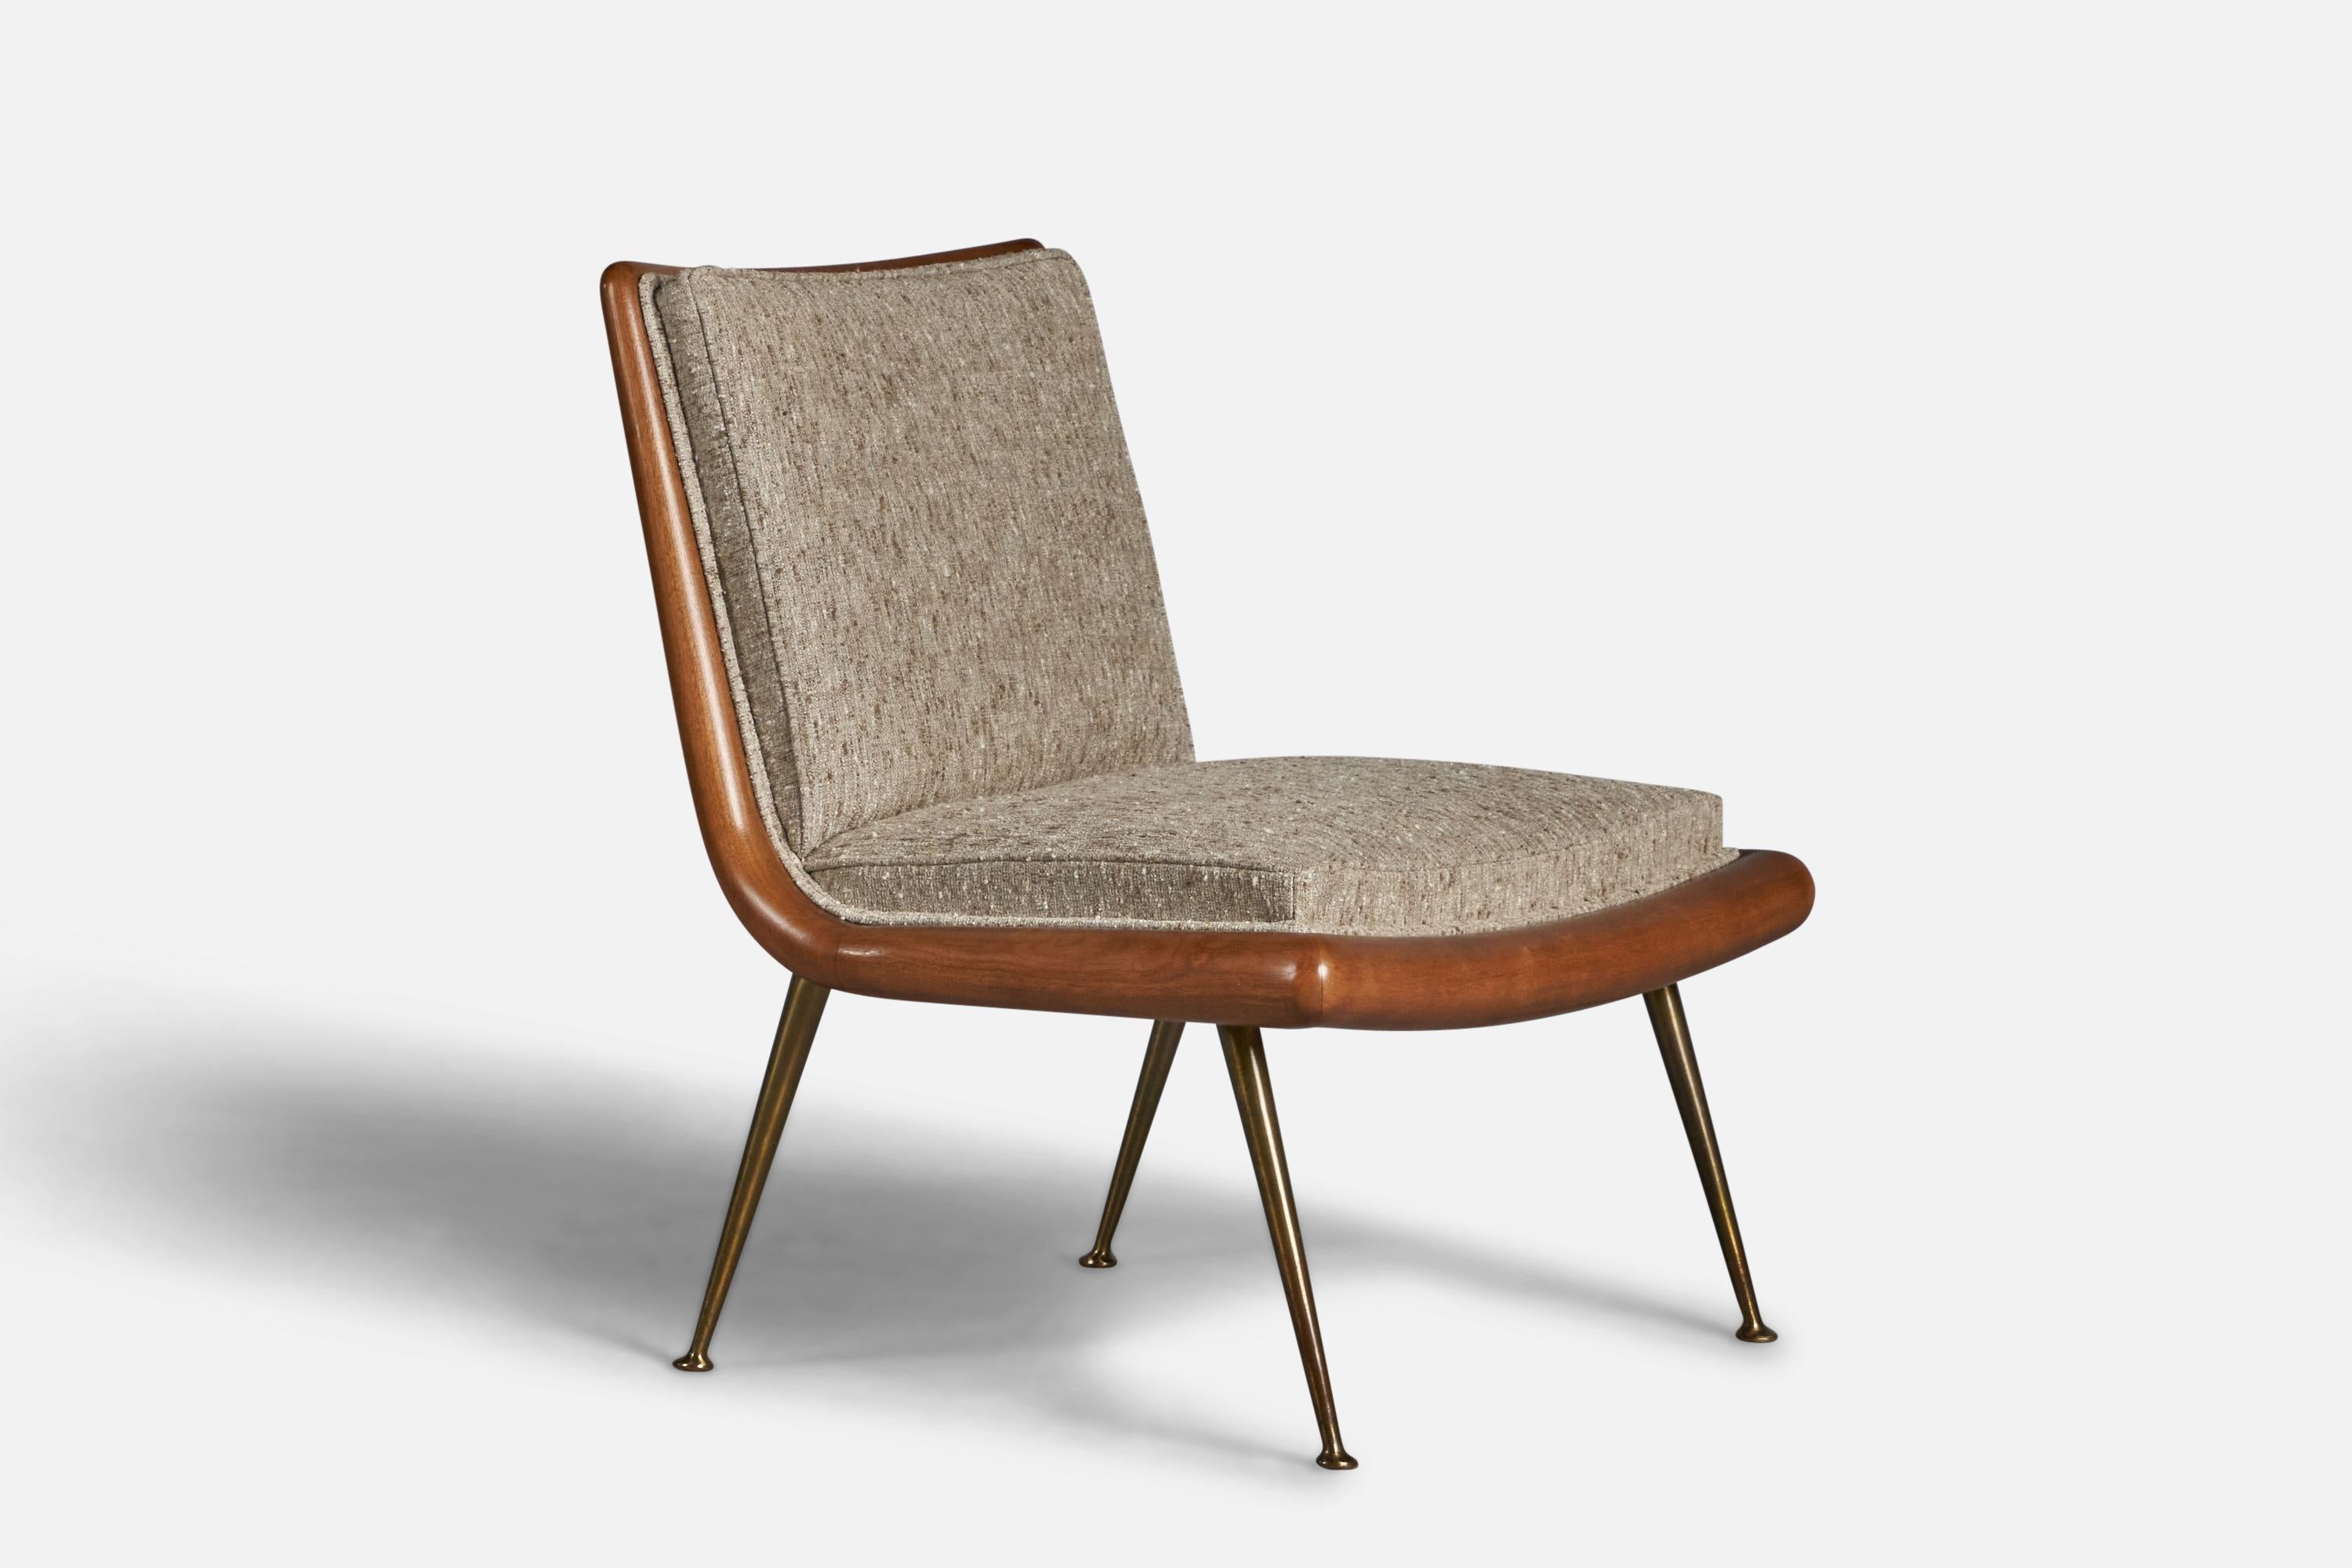 A brass, walnut and beige fabric slipper chair designed by T.H. Robsjohn-Gibbings and produced by Widdicomb, USA, 1950s.

16” seat height
